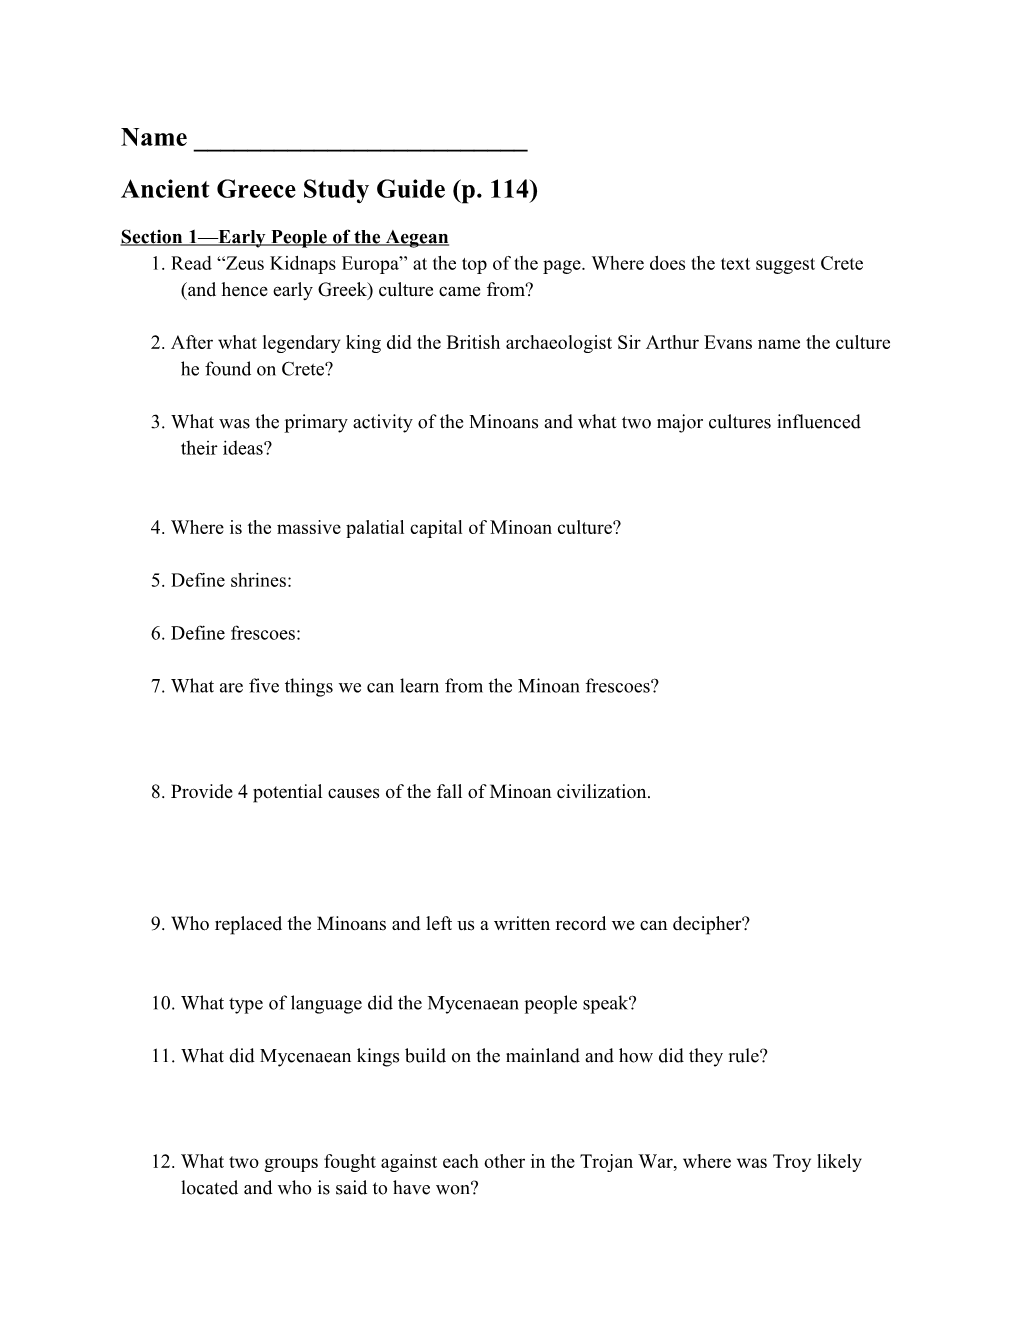 Ancient Greece Study Guide (P. 114)